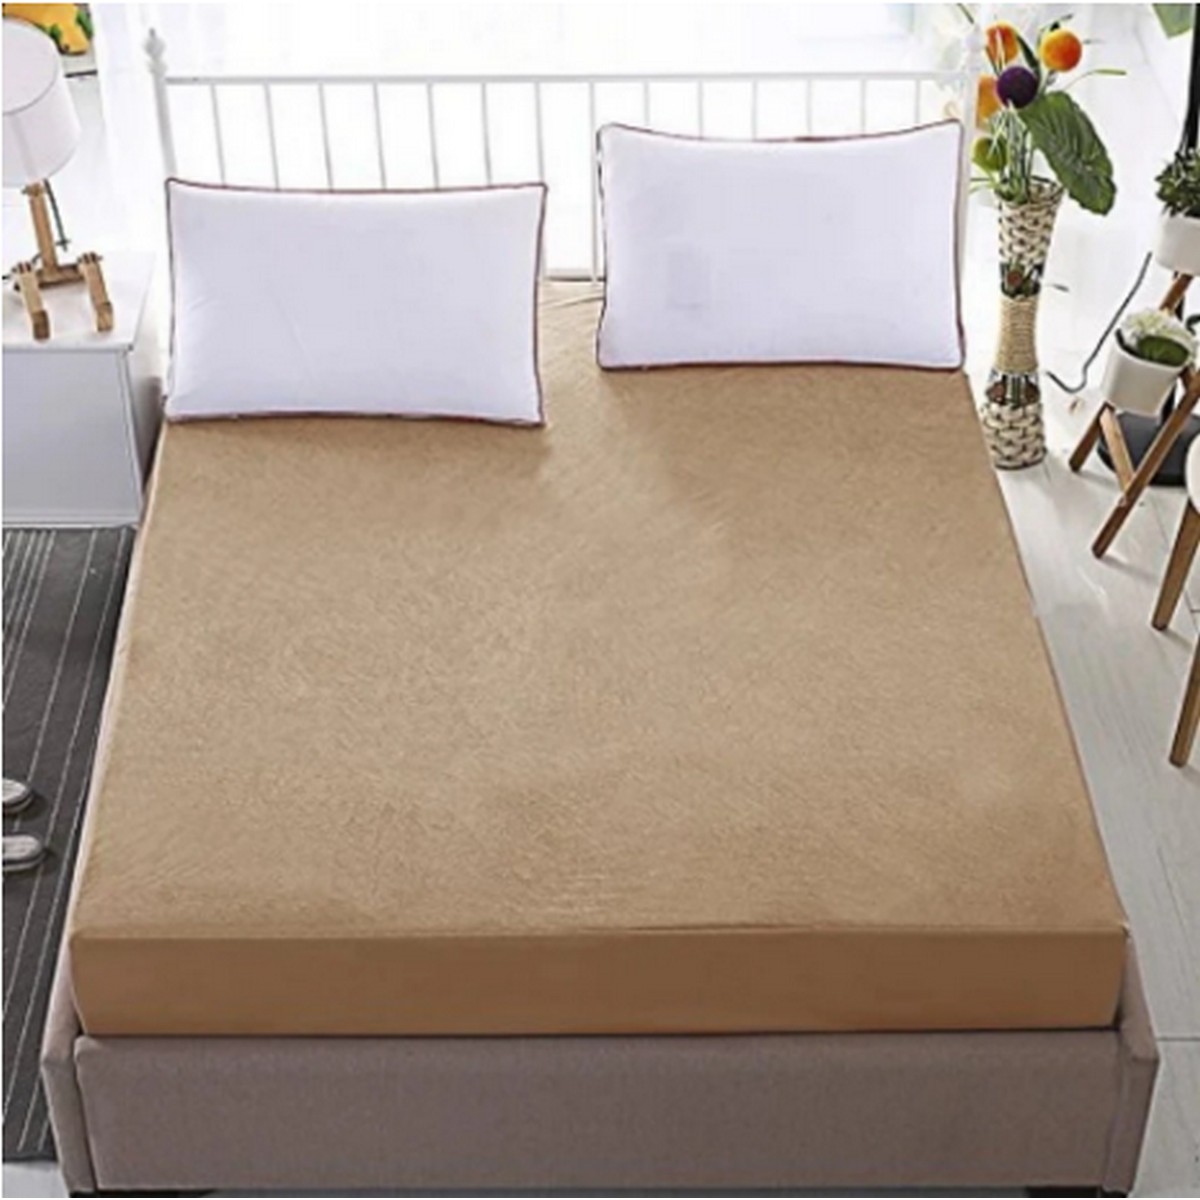 Water proof mattress cover double bed-modernwears-pk-price-pakistan